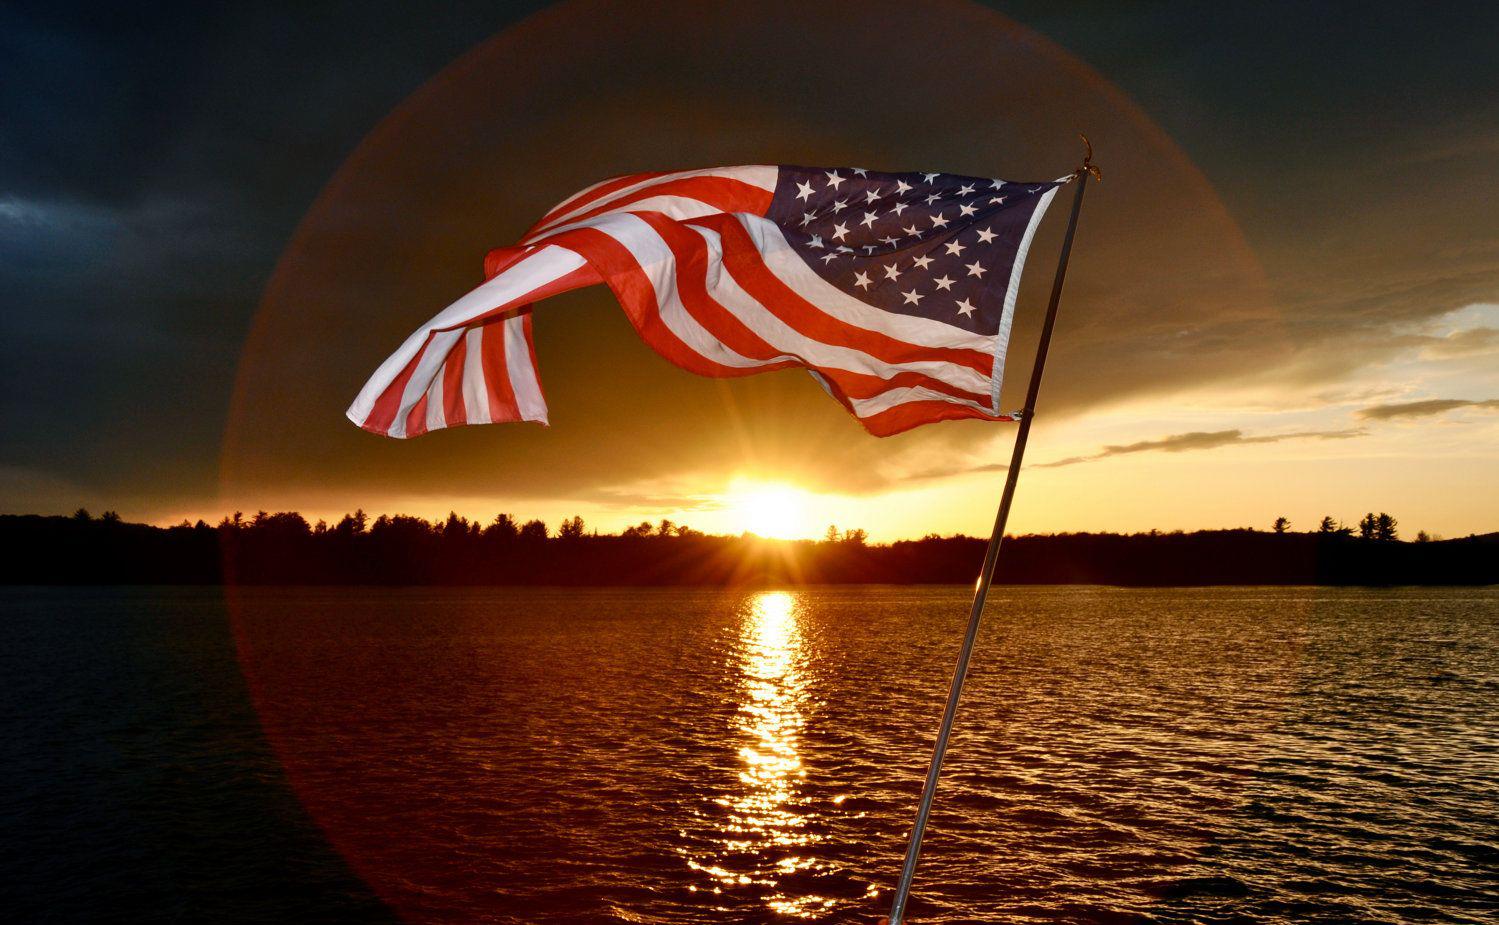 Most viewed God Bless America wallpapers.